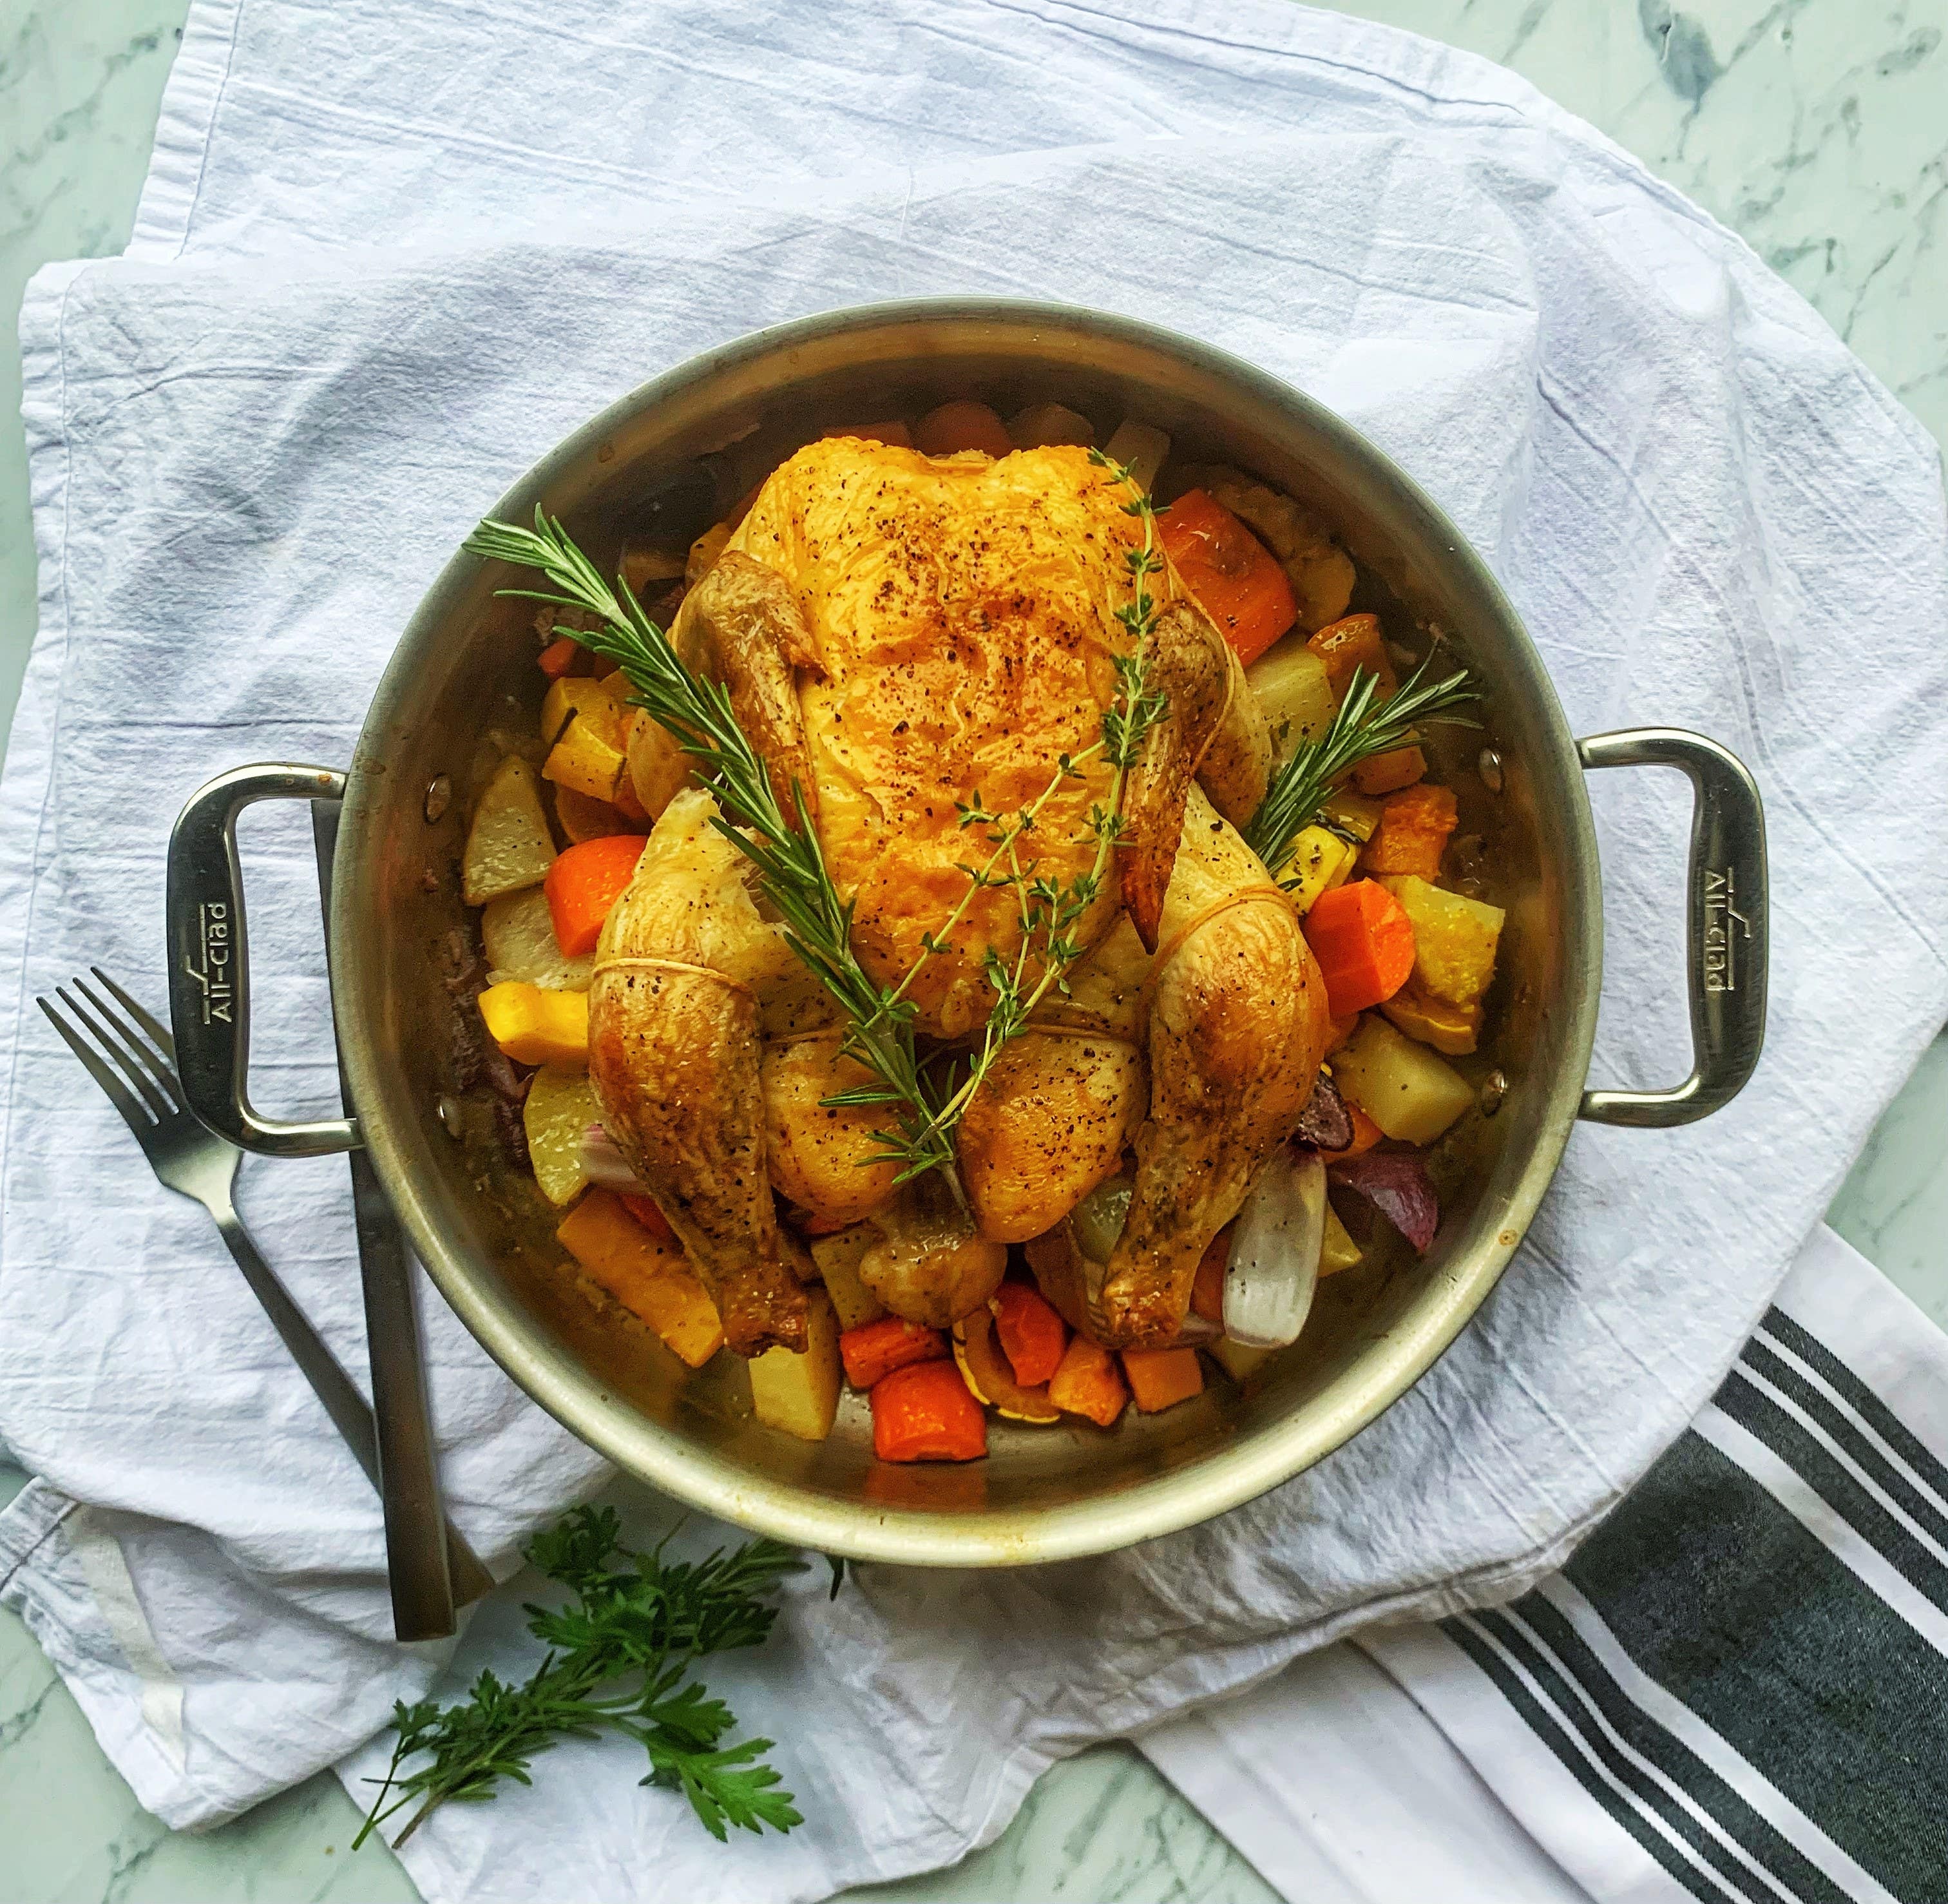 One Pan Chicken and Root Vegetable Dinner